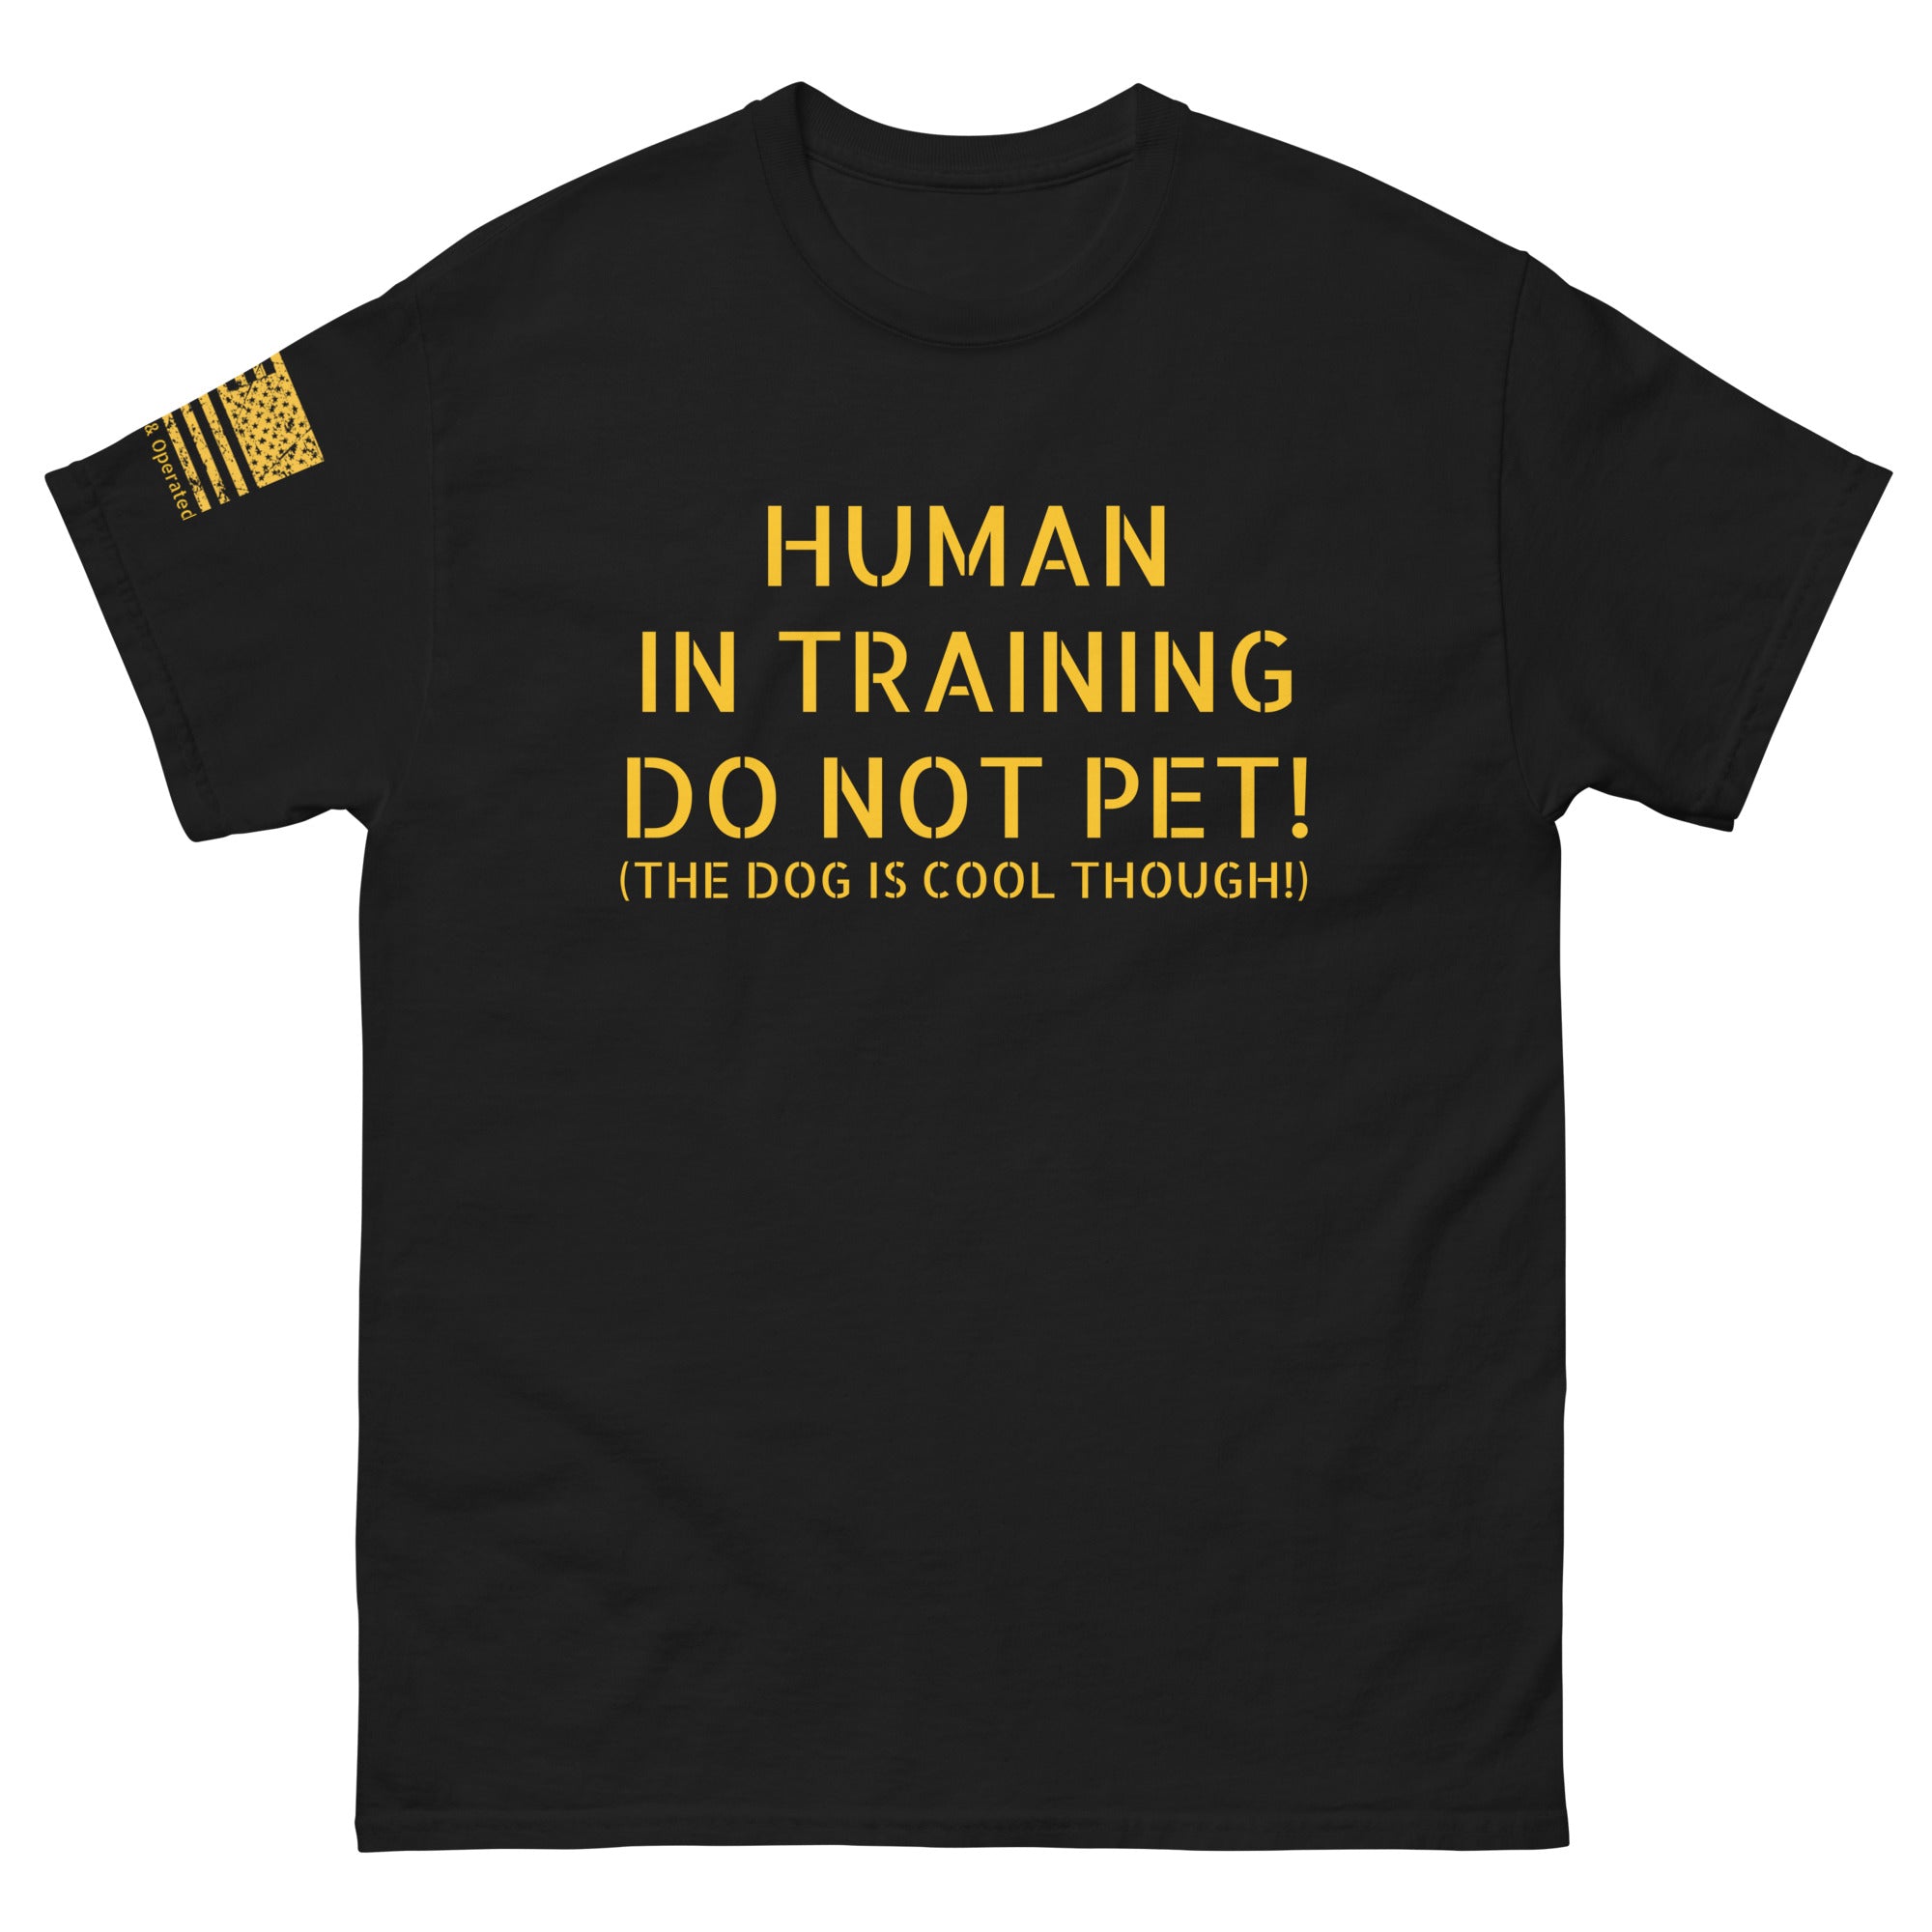 Men's T-Shirt ELS Human in Training Do not Pet! (But the Dog is Cool Though)